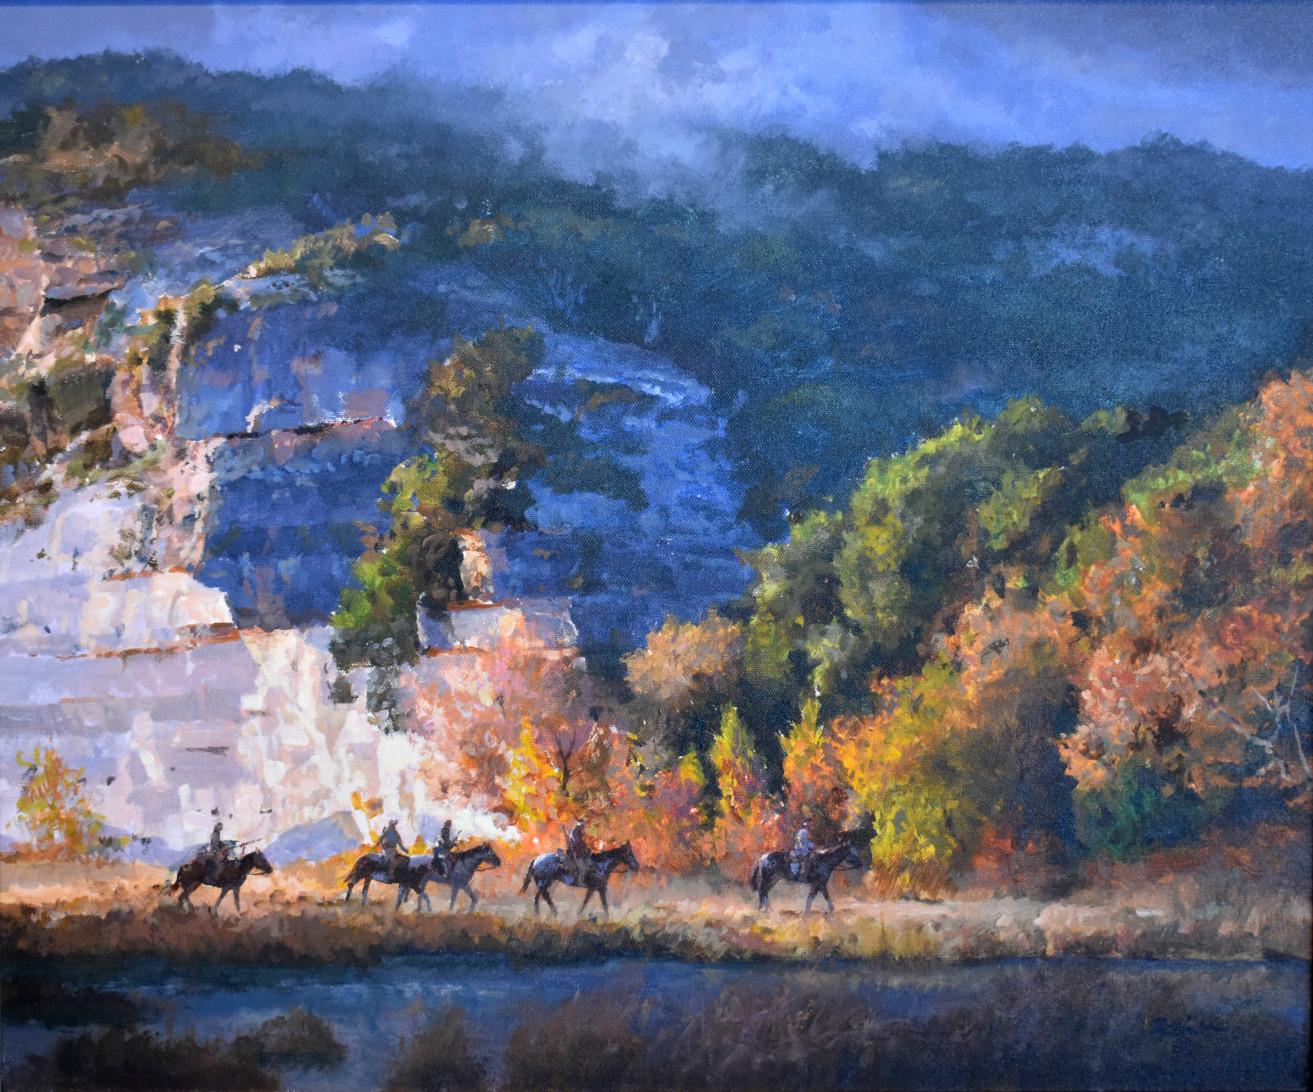 James Robinson Landscape Painting - "Ever Vigilant"  Native American Indians on horseback riding by a stream.